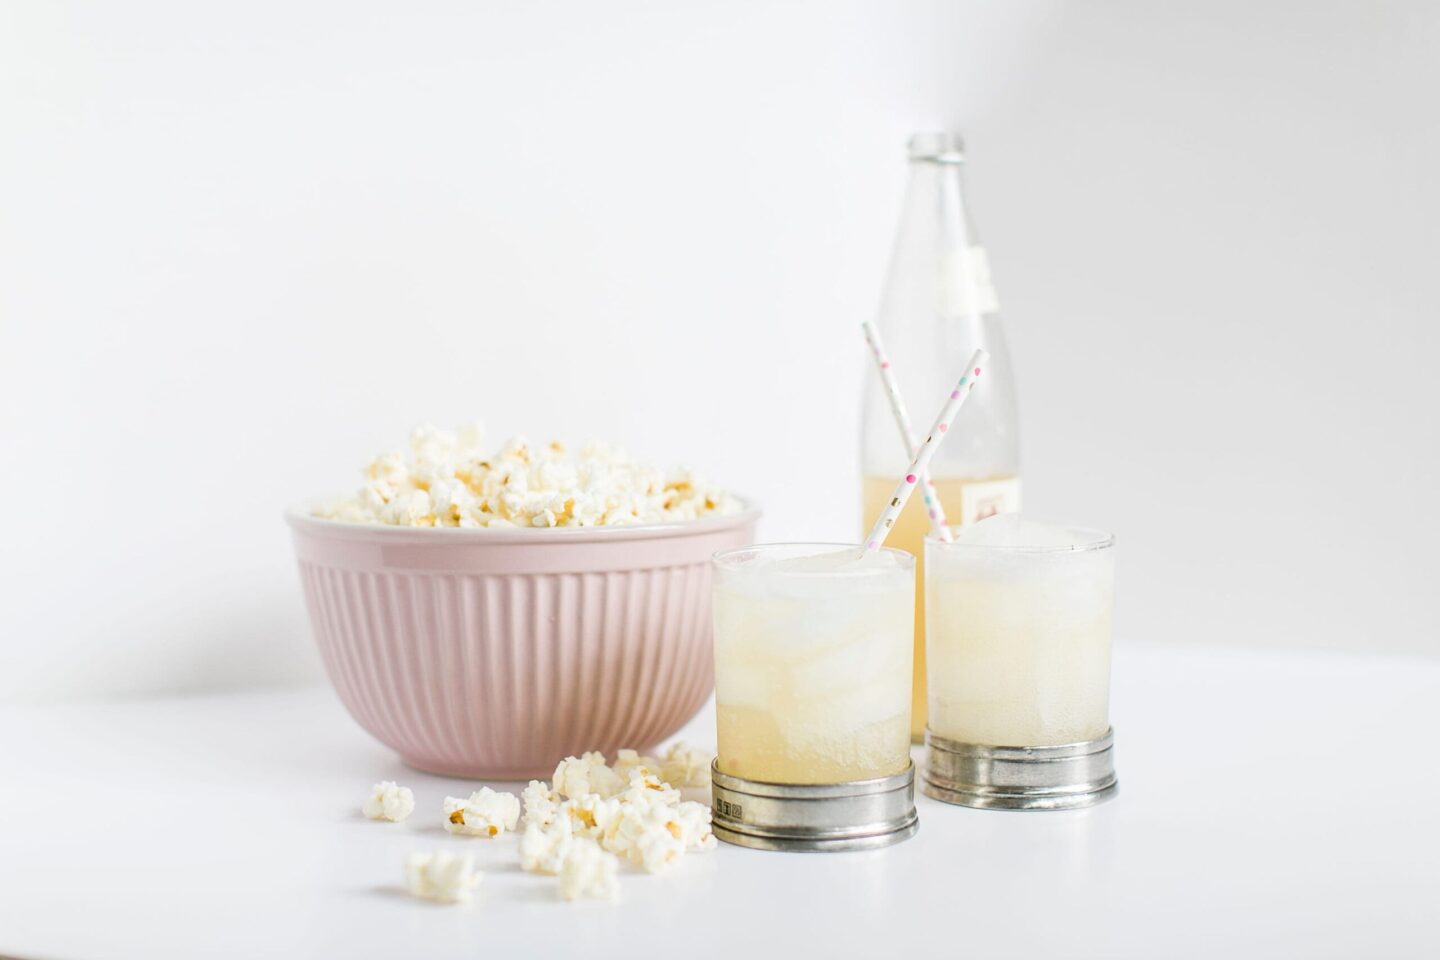 A pink bowl filled with popcorn and two glasses of soda pop: the best travel movie snacks